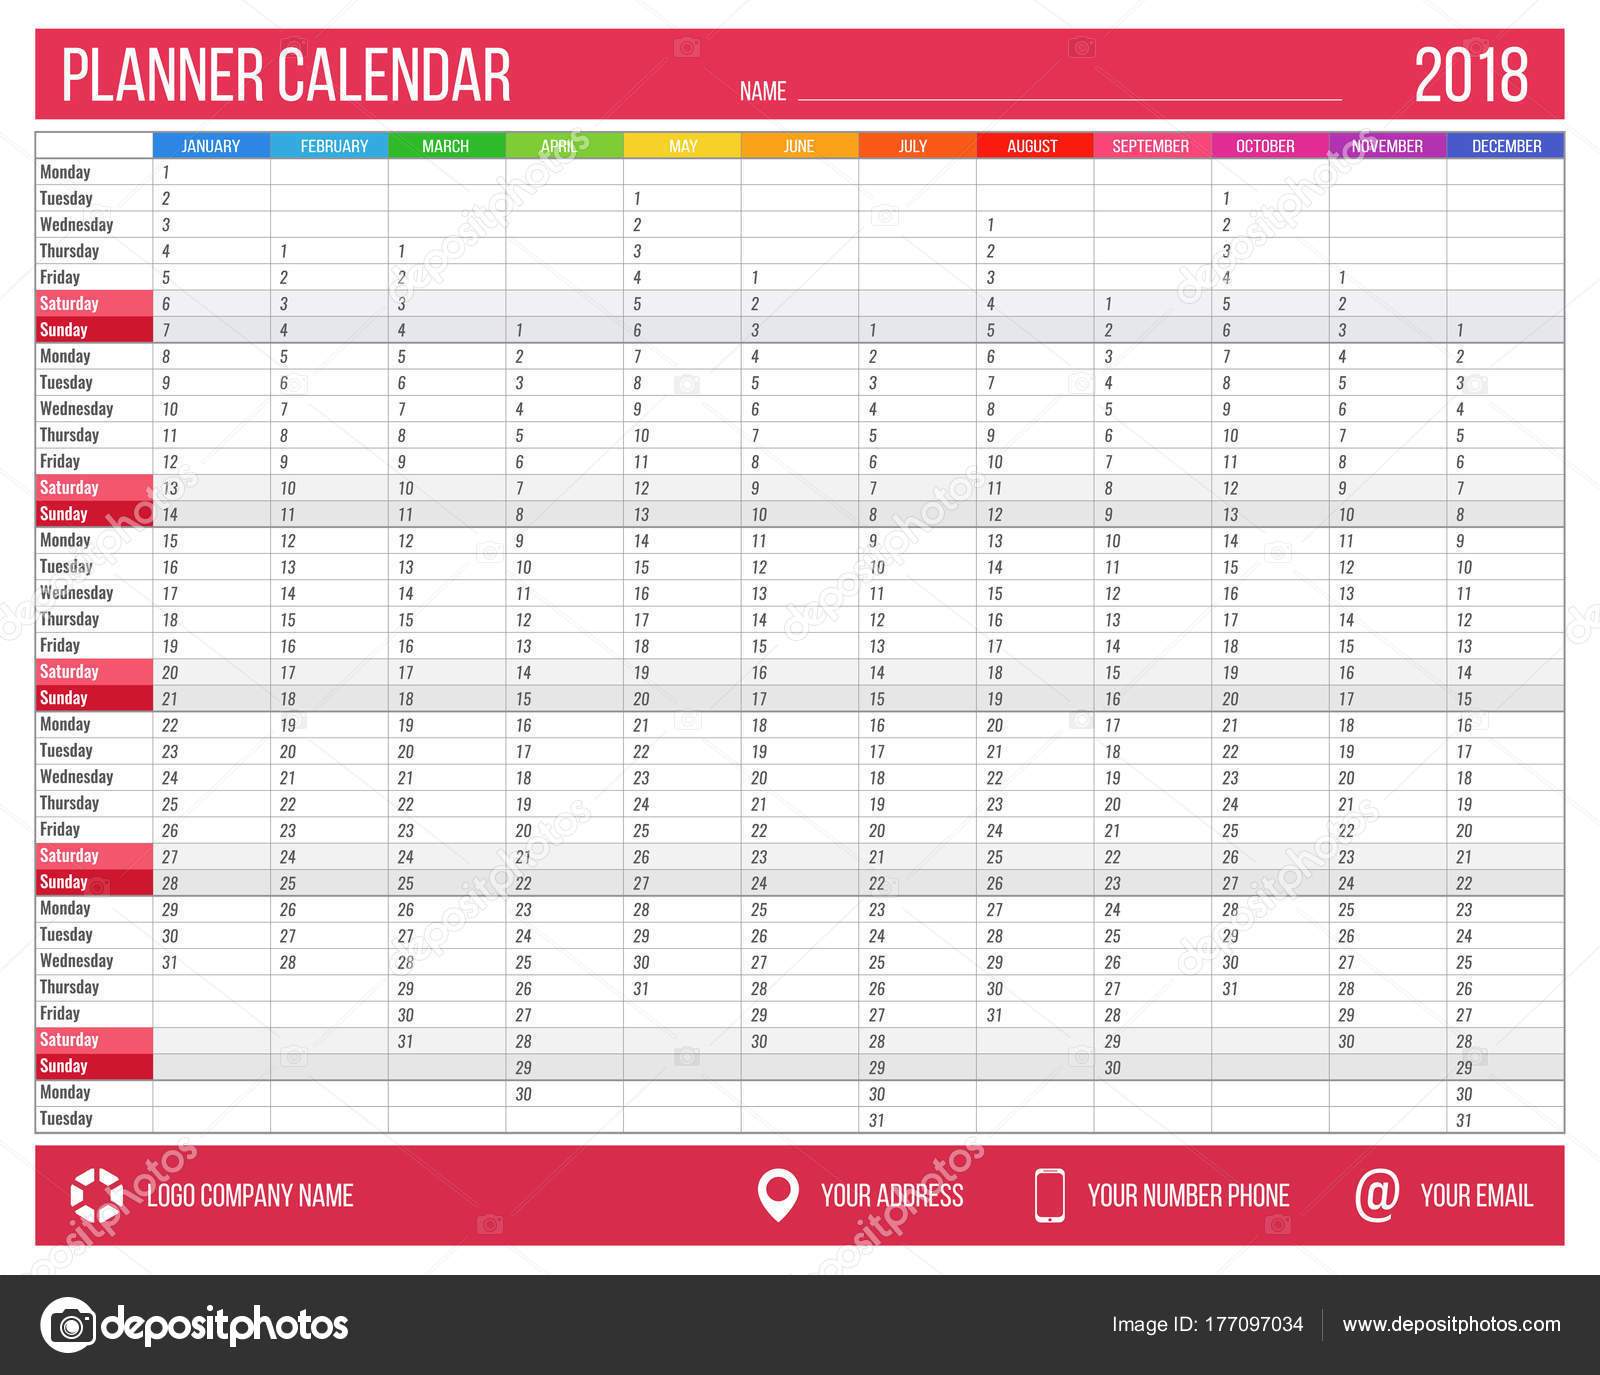 english-calendar-planner-for-year-2018-12-months-corporate-design